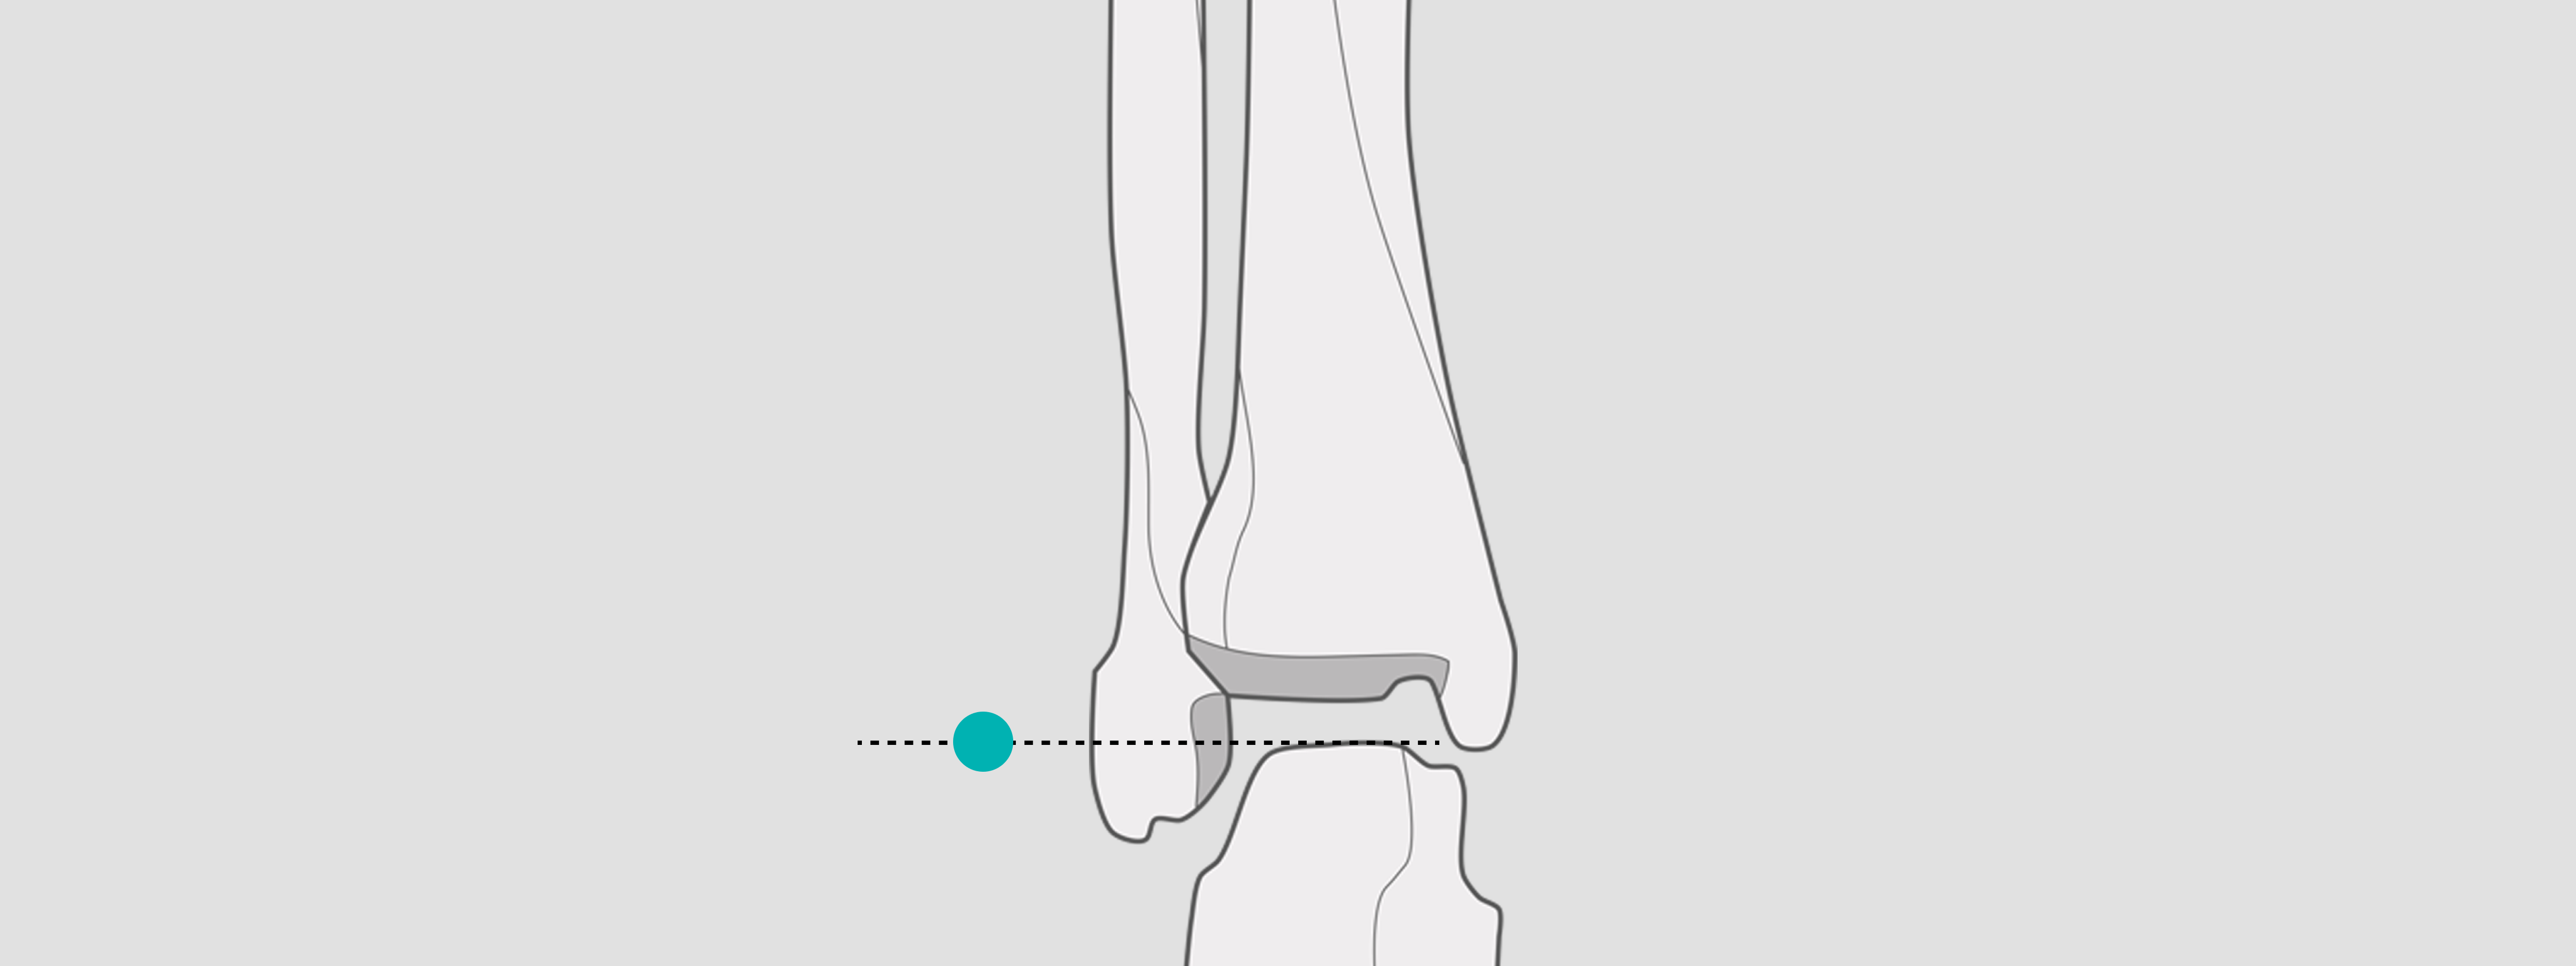 X-ray Calibration - ankle